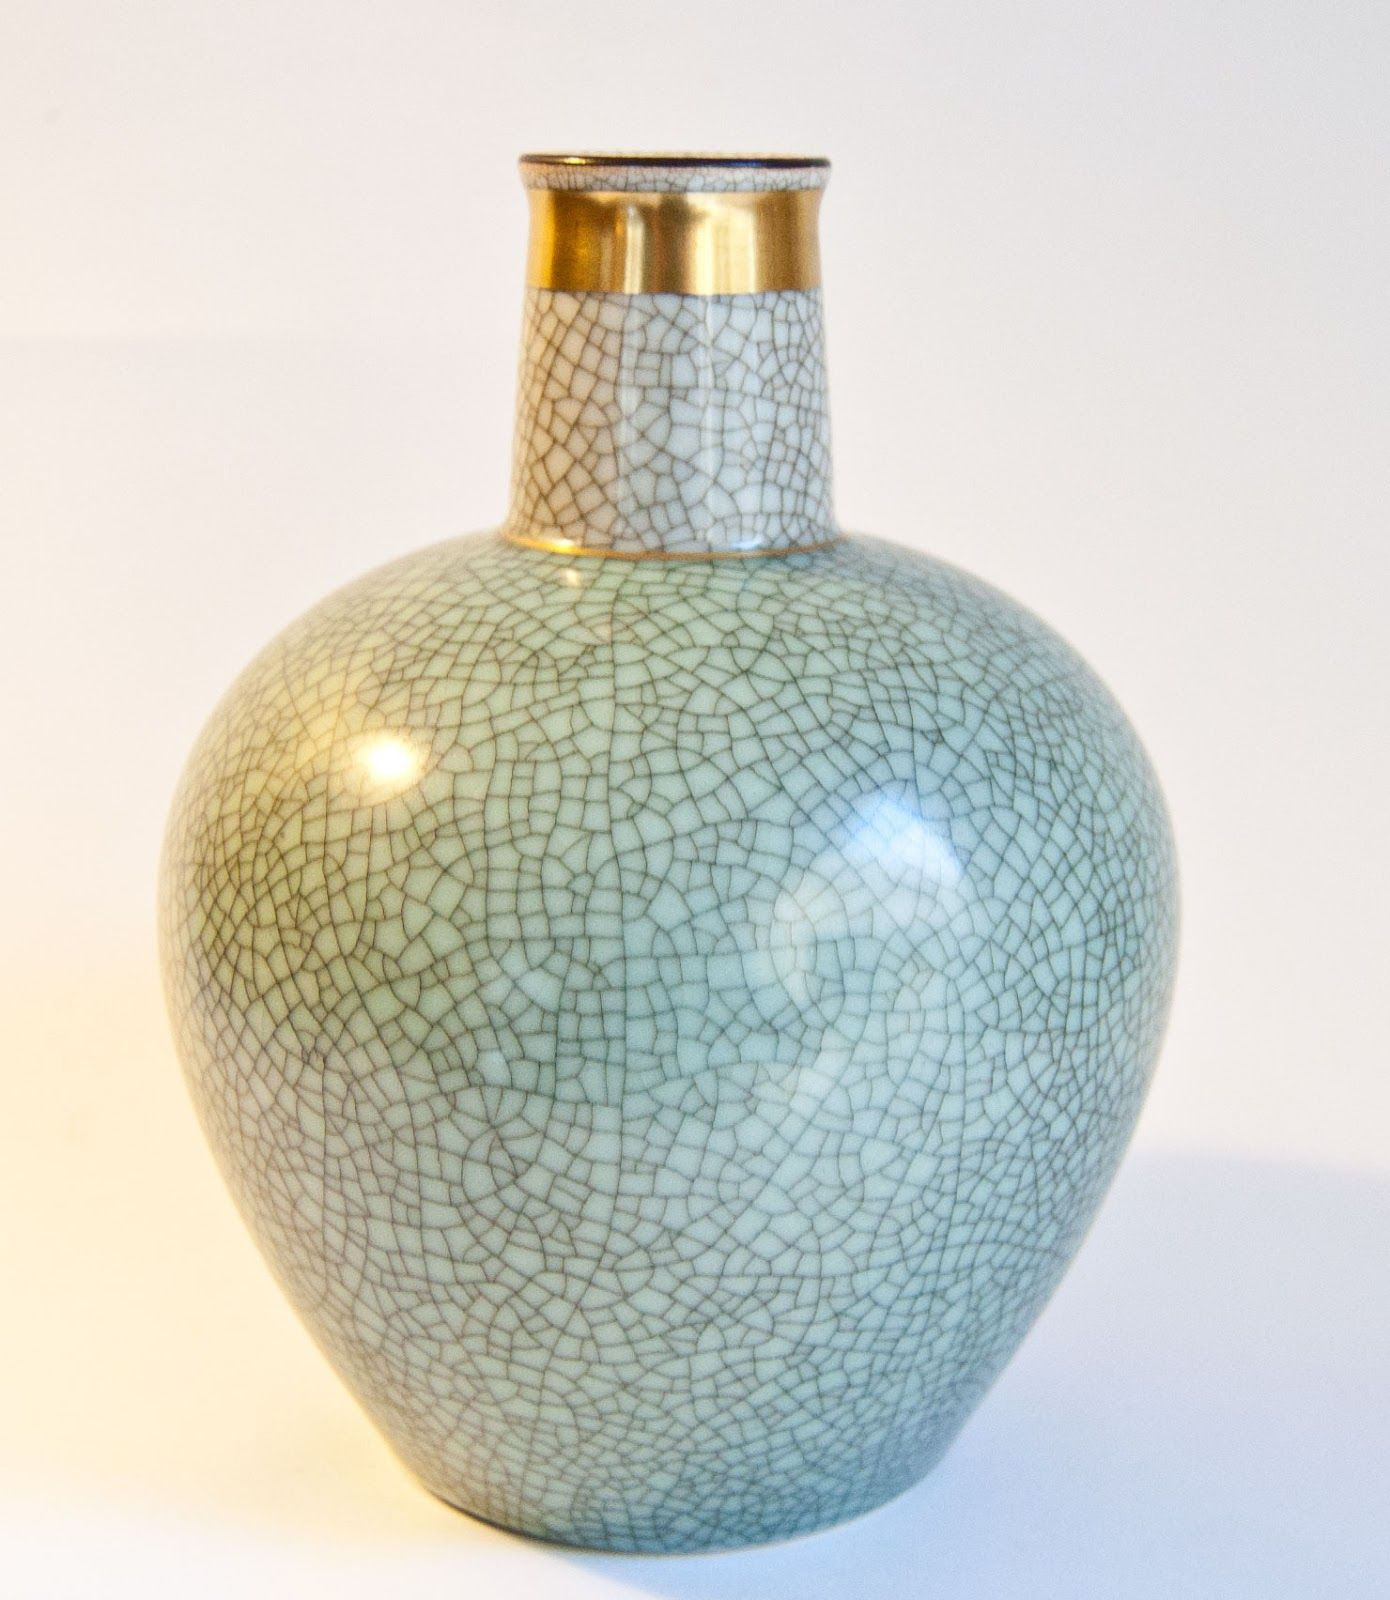 30 Trendy Gold Crackle Vase 2024 free download gold crackle vase of royal blue vases image royal copenhagen crackle ware what the blue intended for royal blue vases image royal copenhagen crackle ware what the blue lamp was made from